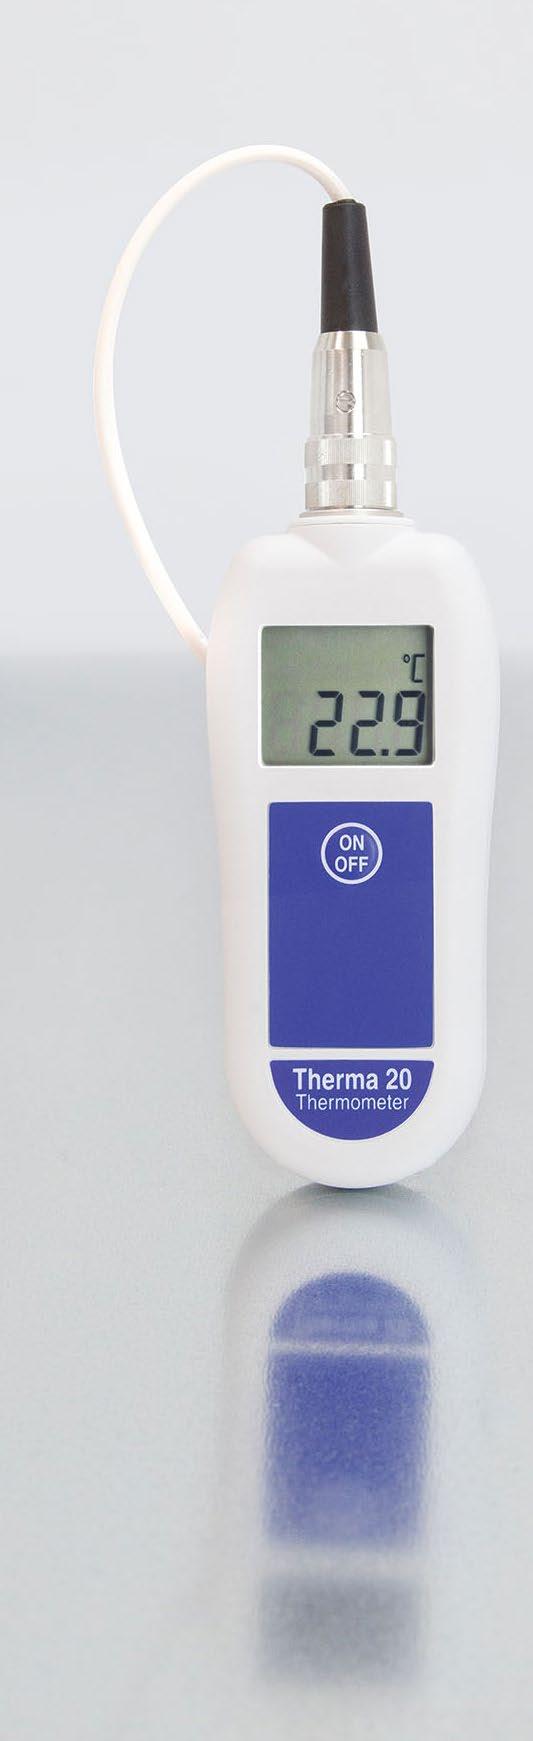 thermistor probes fast response thermistor probes for thermometers & data-loggers Thermometers are only part of the system; of equal importance is the design of the temperature probes used to